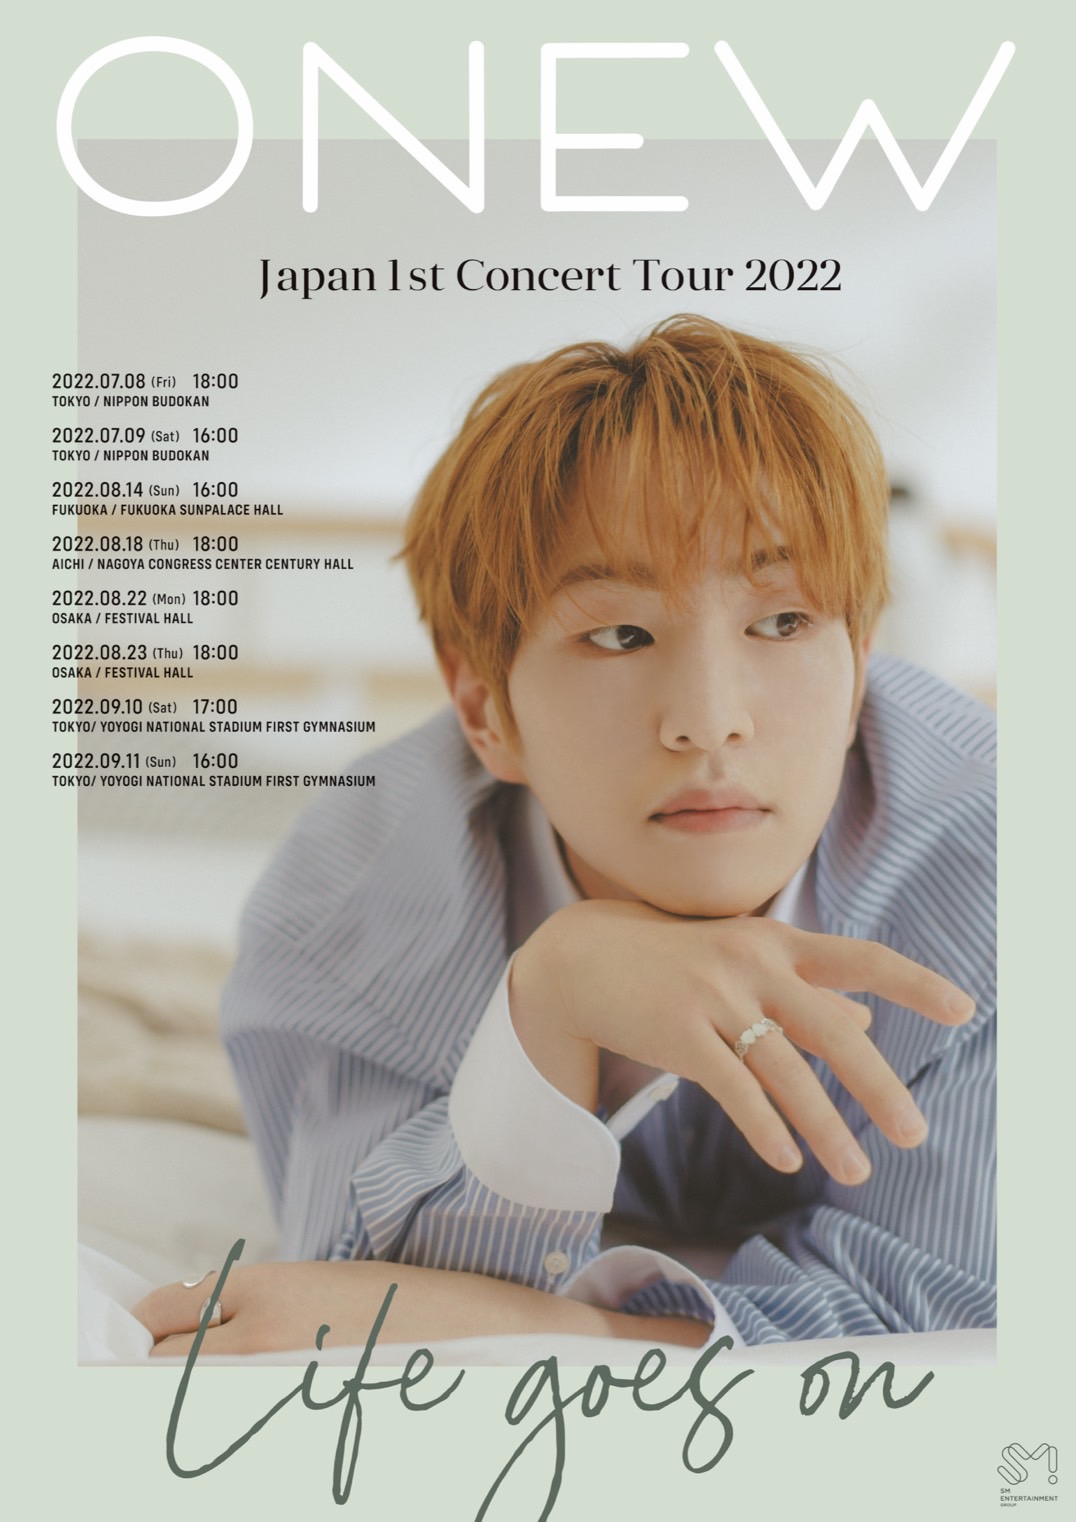 ONEW Japan 1st Concert Tour 2022 ～Life goes on～